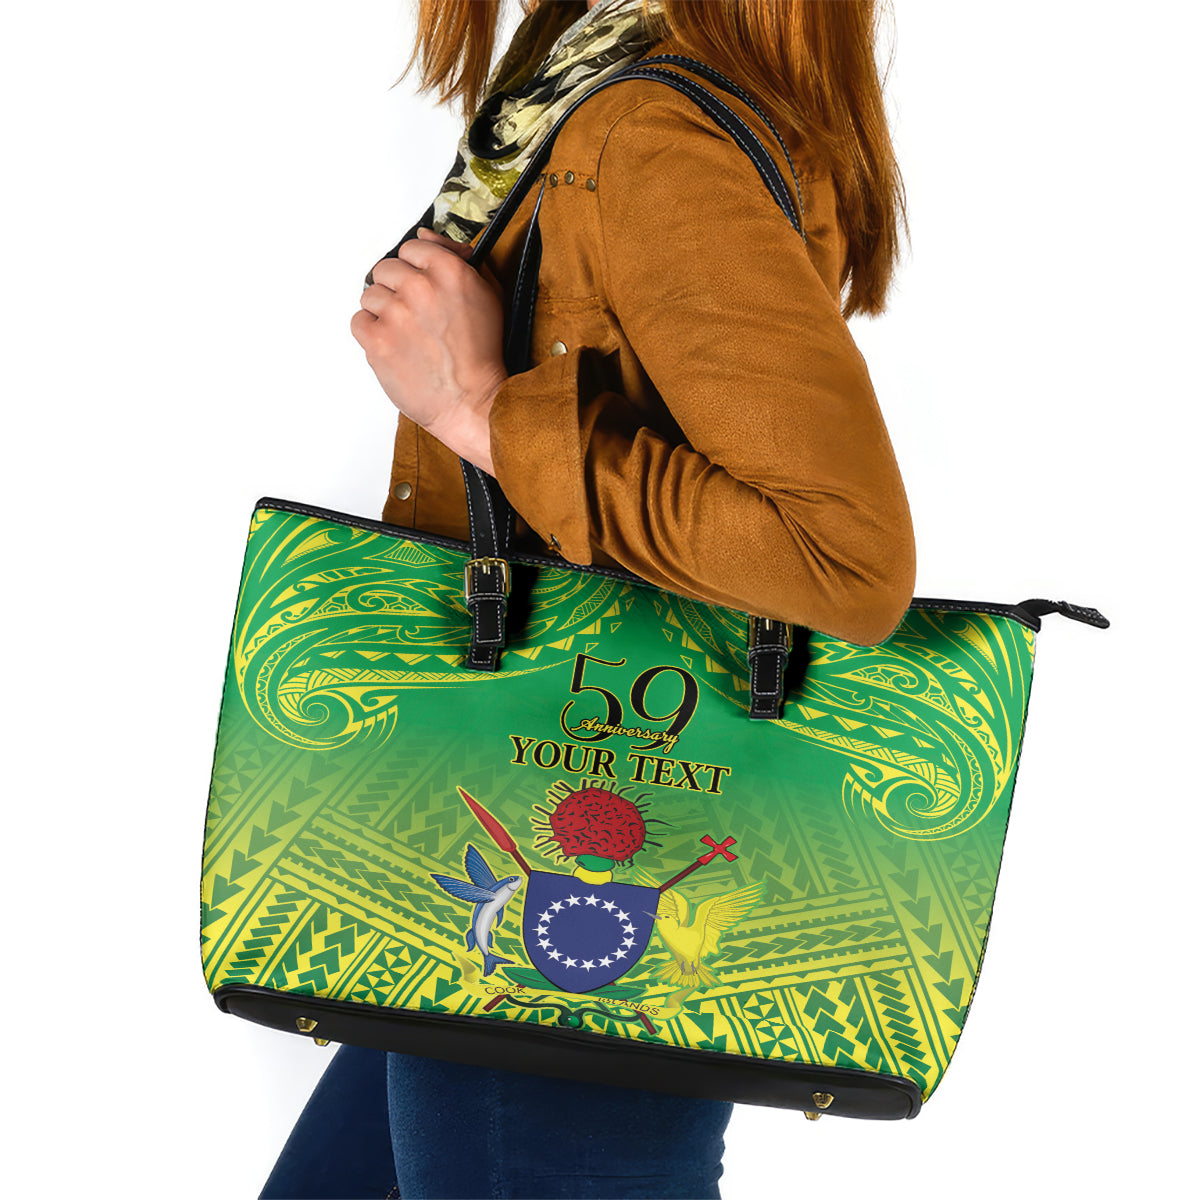 Cook Islands Constitution Day Leather Tote Bag Kuki Airani Since 1965